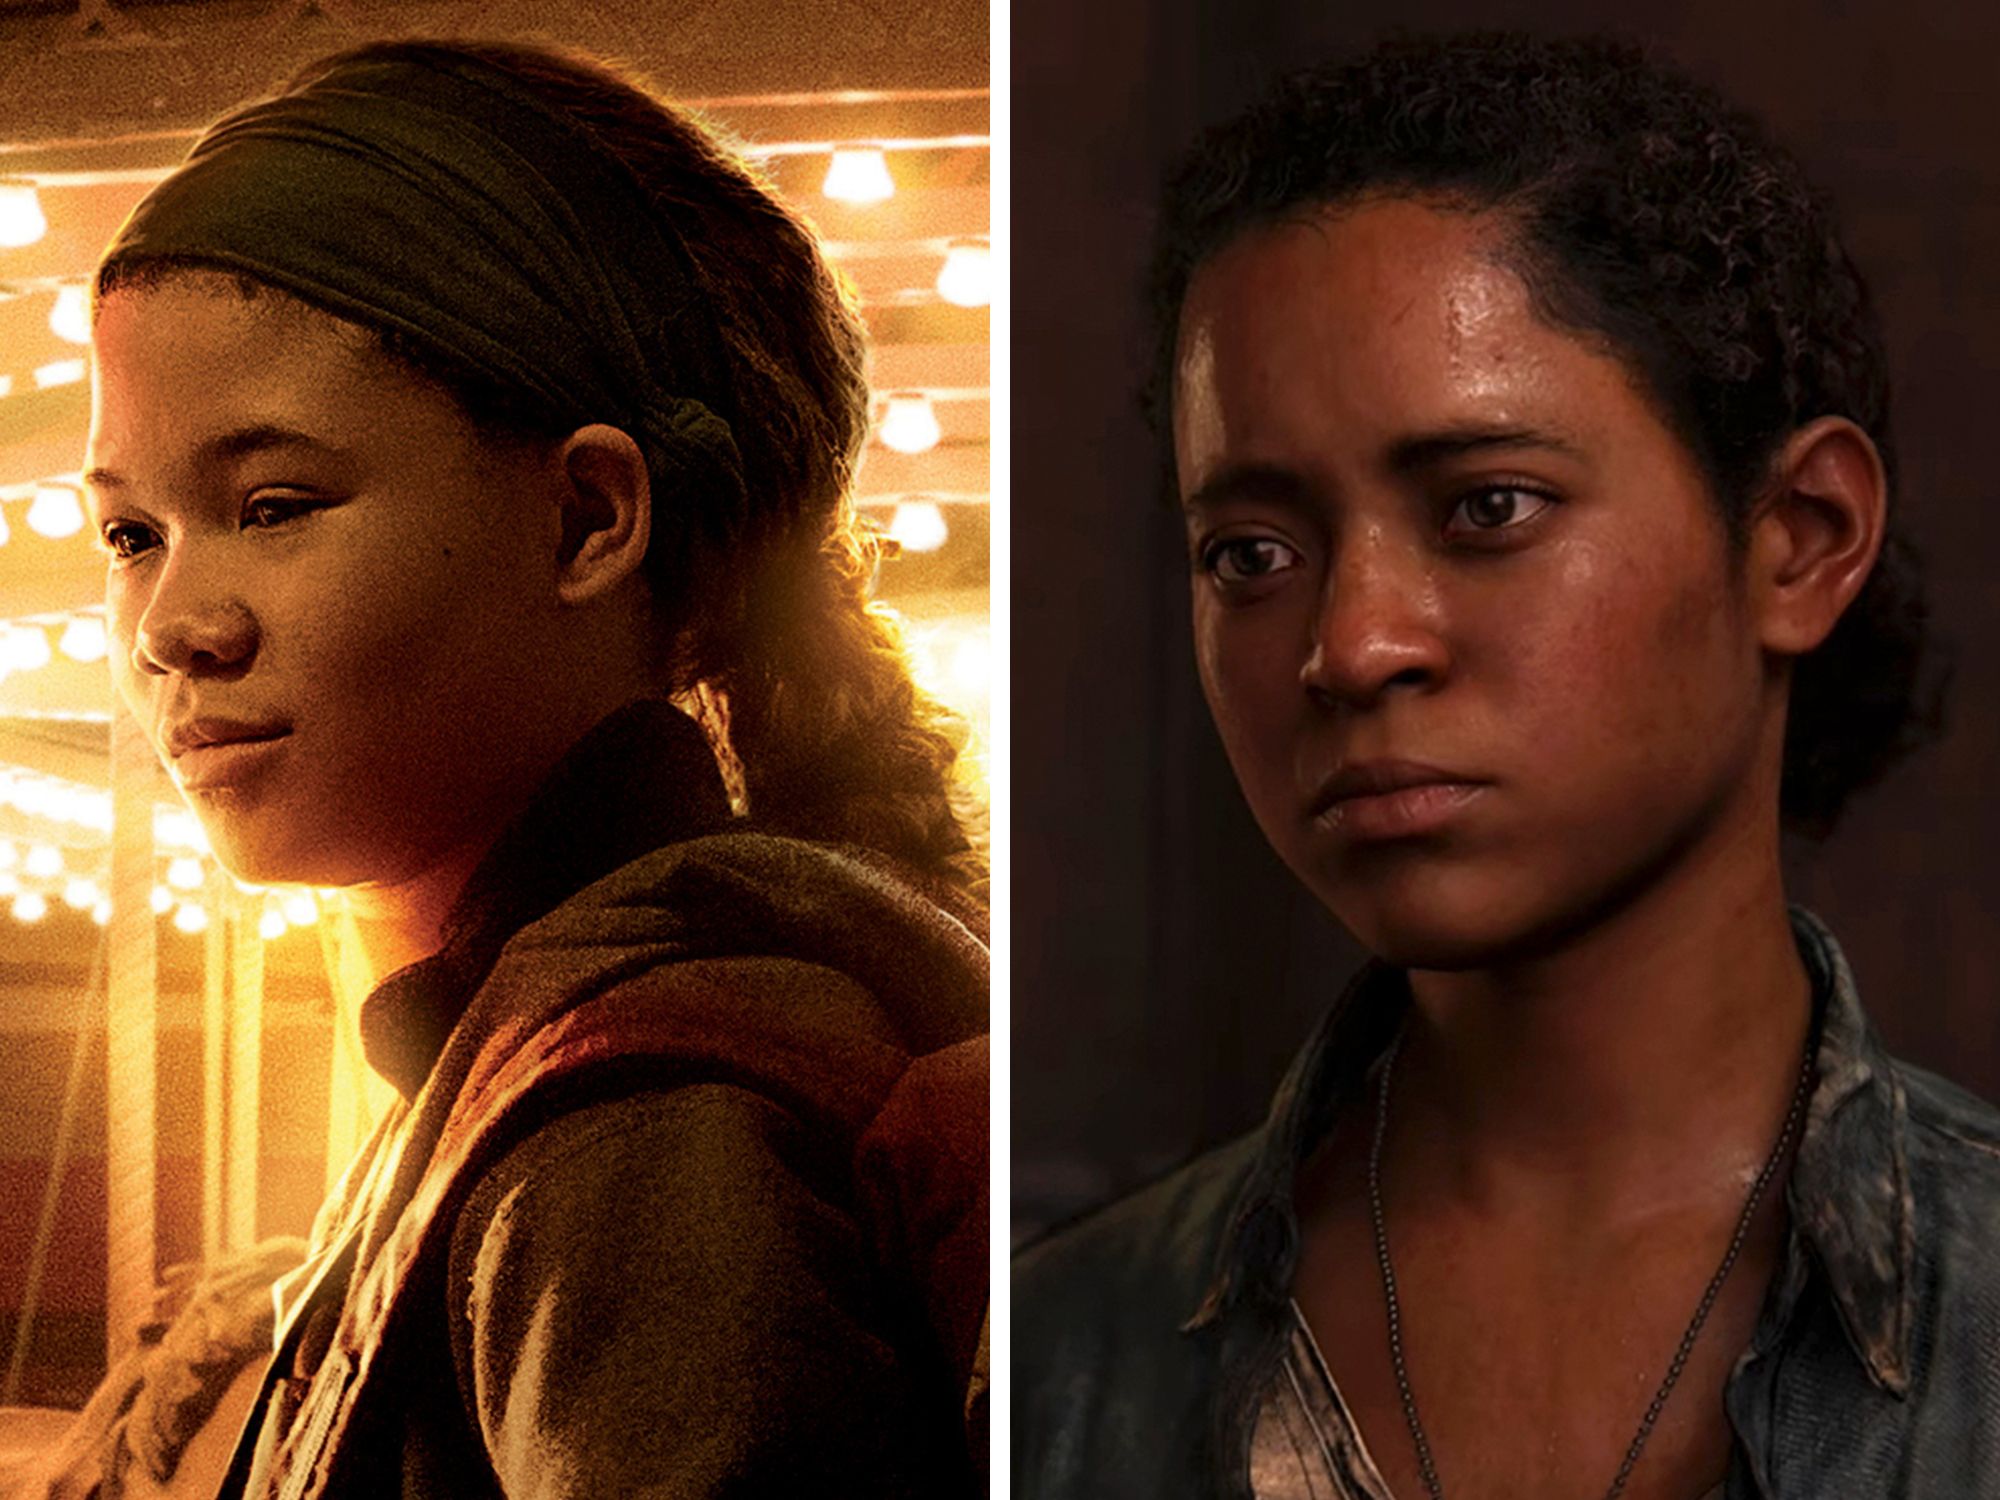 How The Last Of Us Episode 4 Compares To The Original Video Game